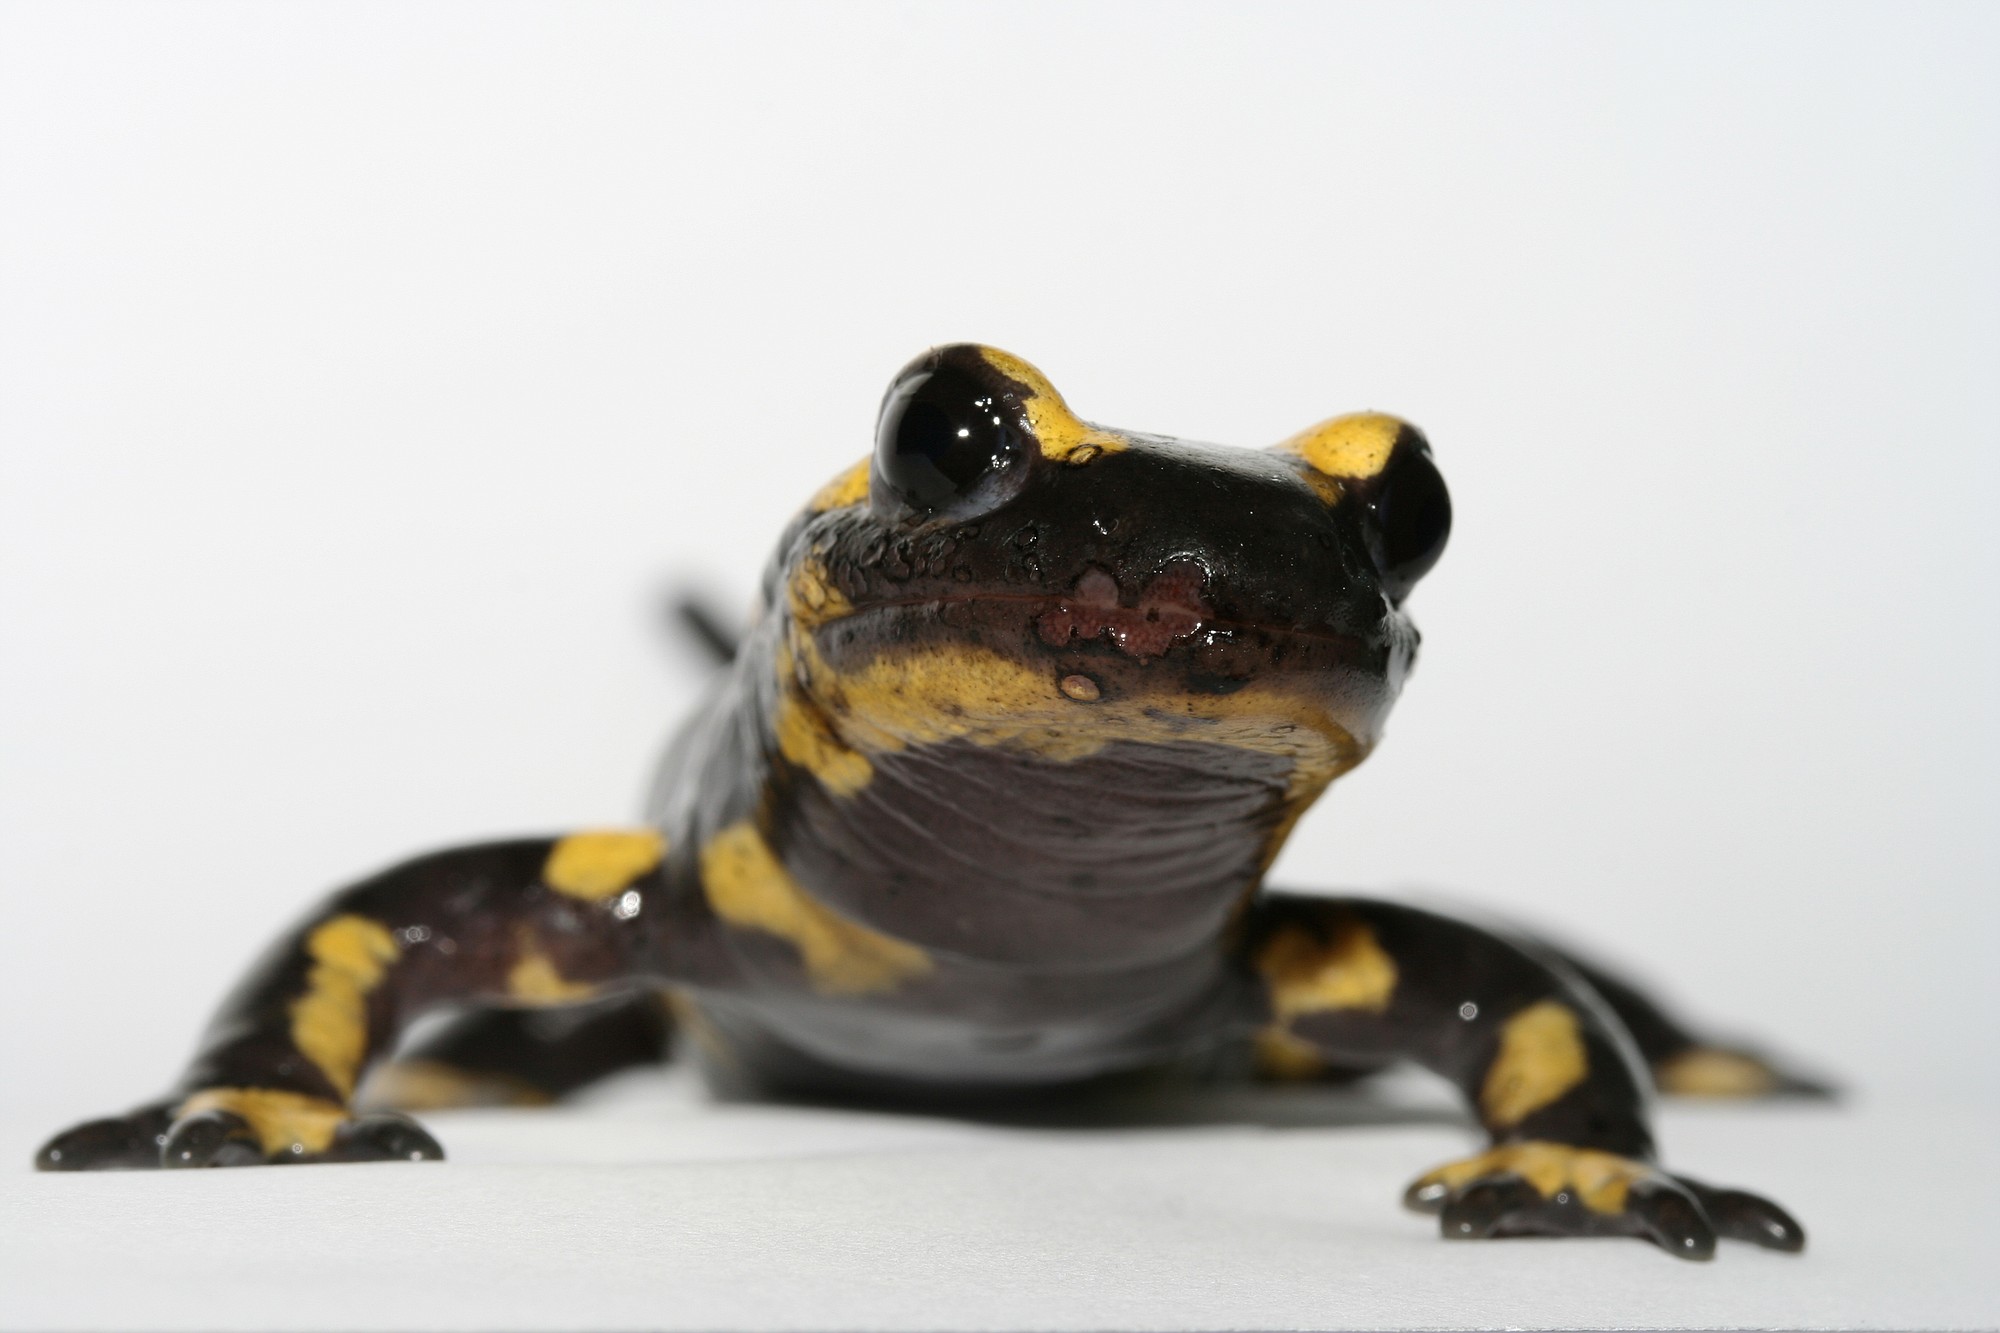 Frank Pasmans/The Washington Post
A fire salamander with B. salamandrivorans, already suffering from skin lesions, has chytrid fungus, which is endangering salamanders.